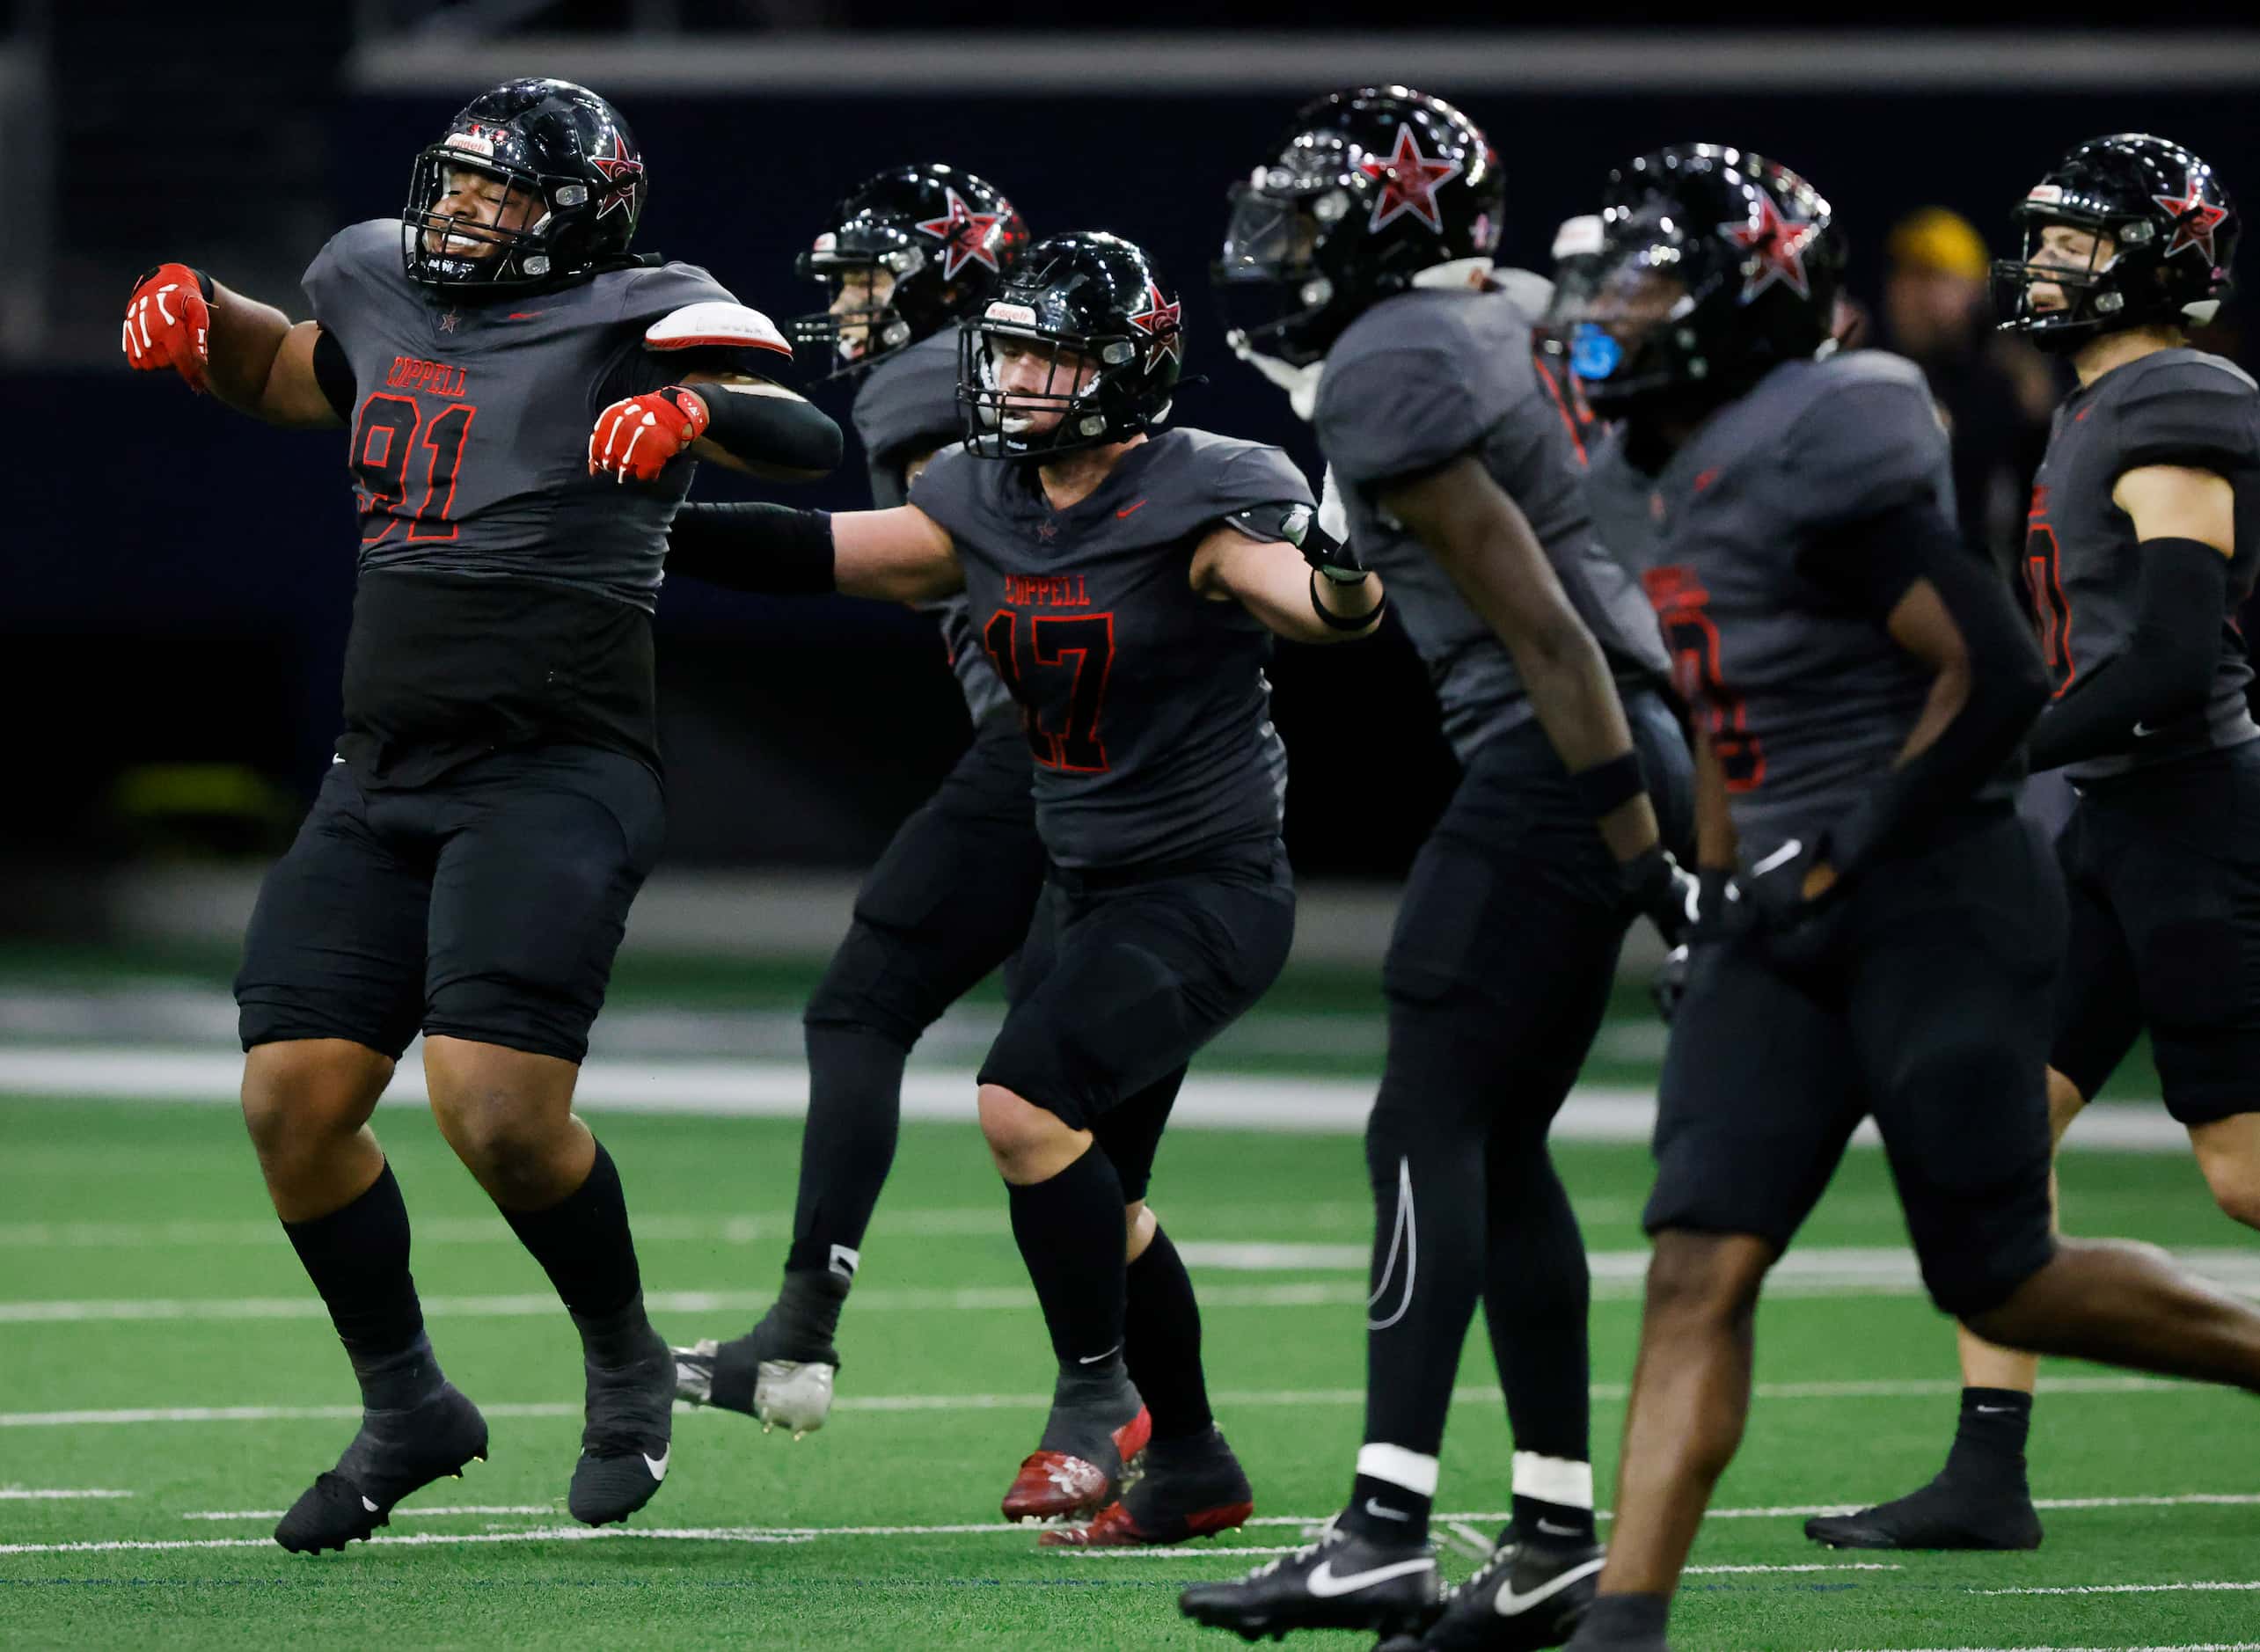 The Coppell defense celebrates their fourth down stop of Jesuit quarterback Charlie Peters...